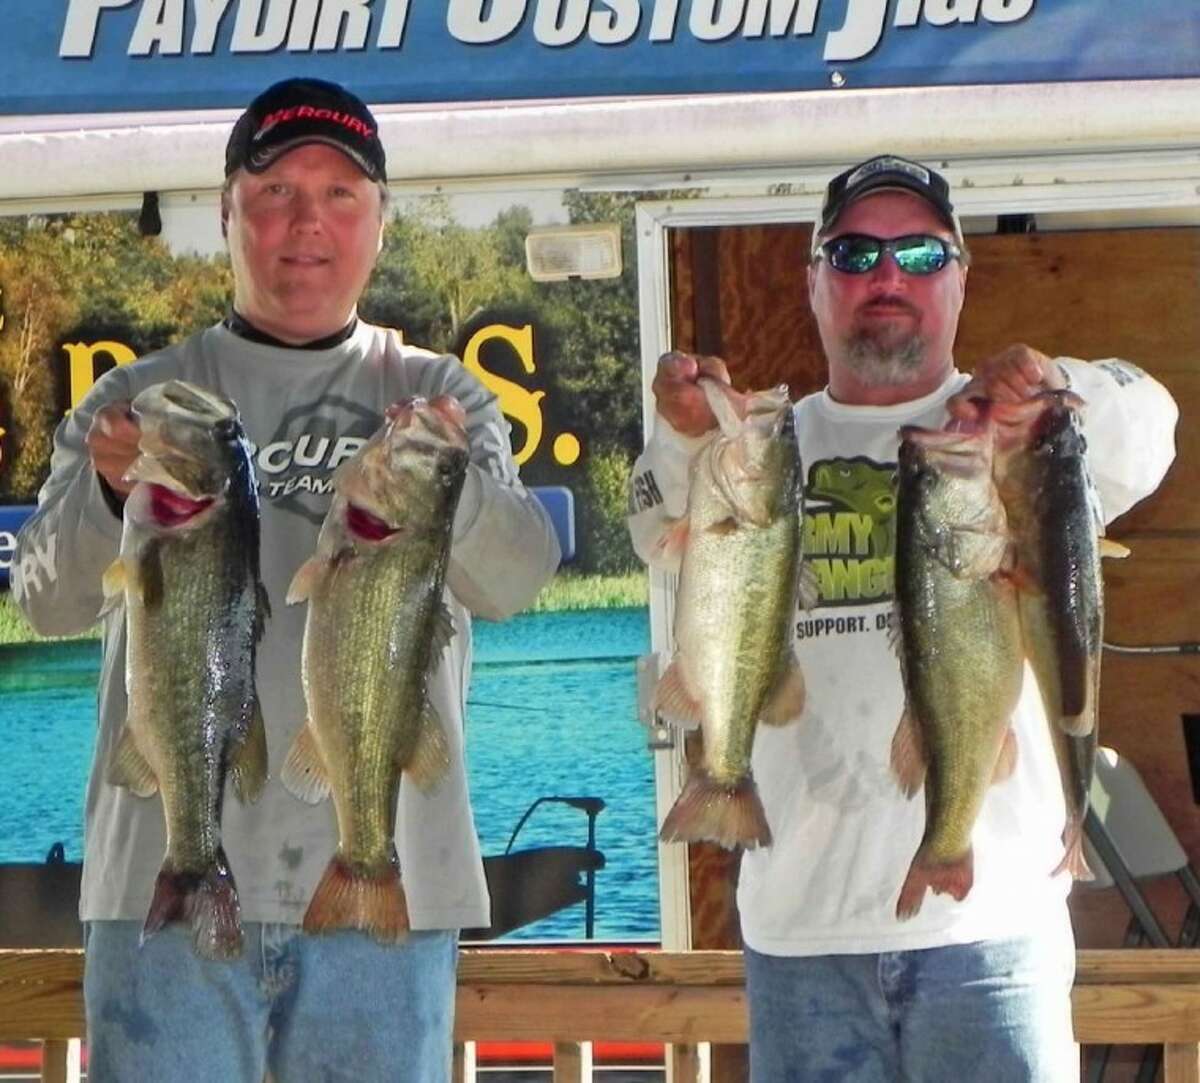 Ricky Bishop and Steve Lee won the Seven Coves Bass Club’s fifth annual Fall Bass Classic with a stringer weighing 25.92 pounds.